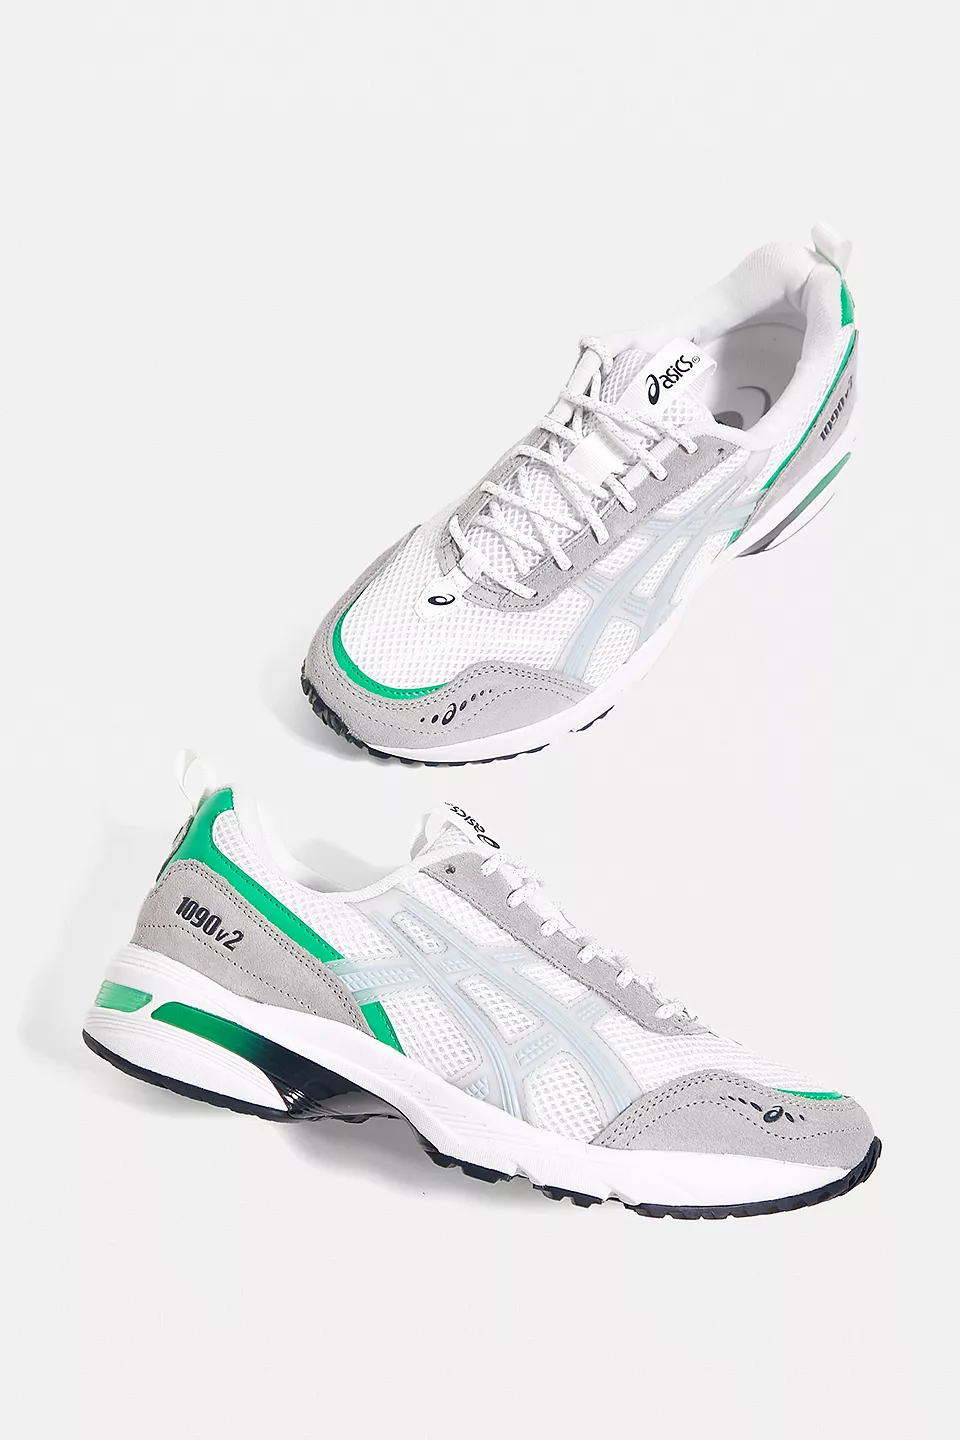 urbanoutfitters.com | ASICS White, Grey & Green GEL-1090 Trainers